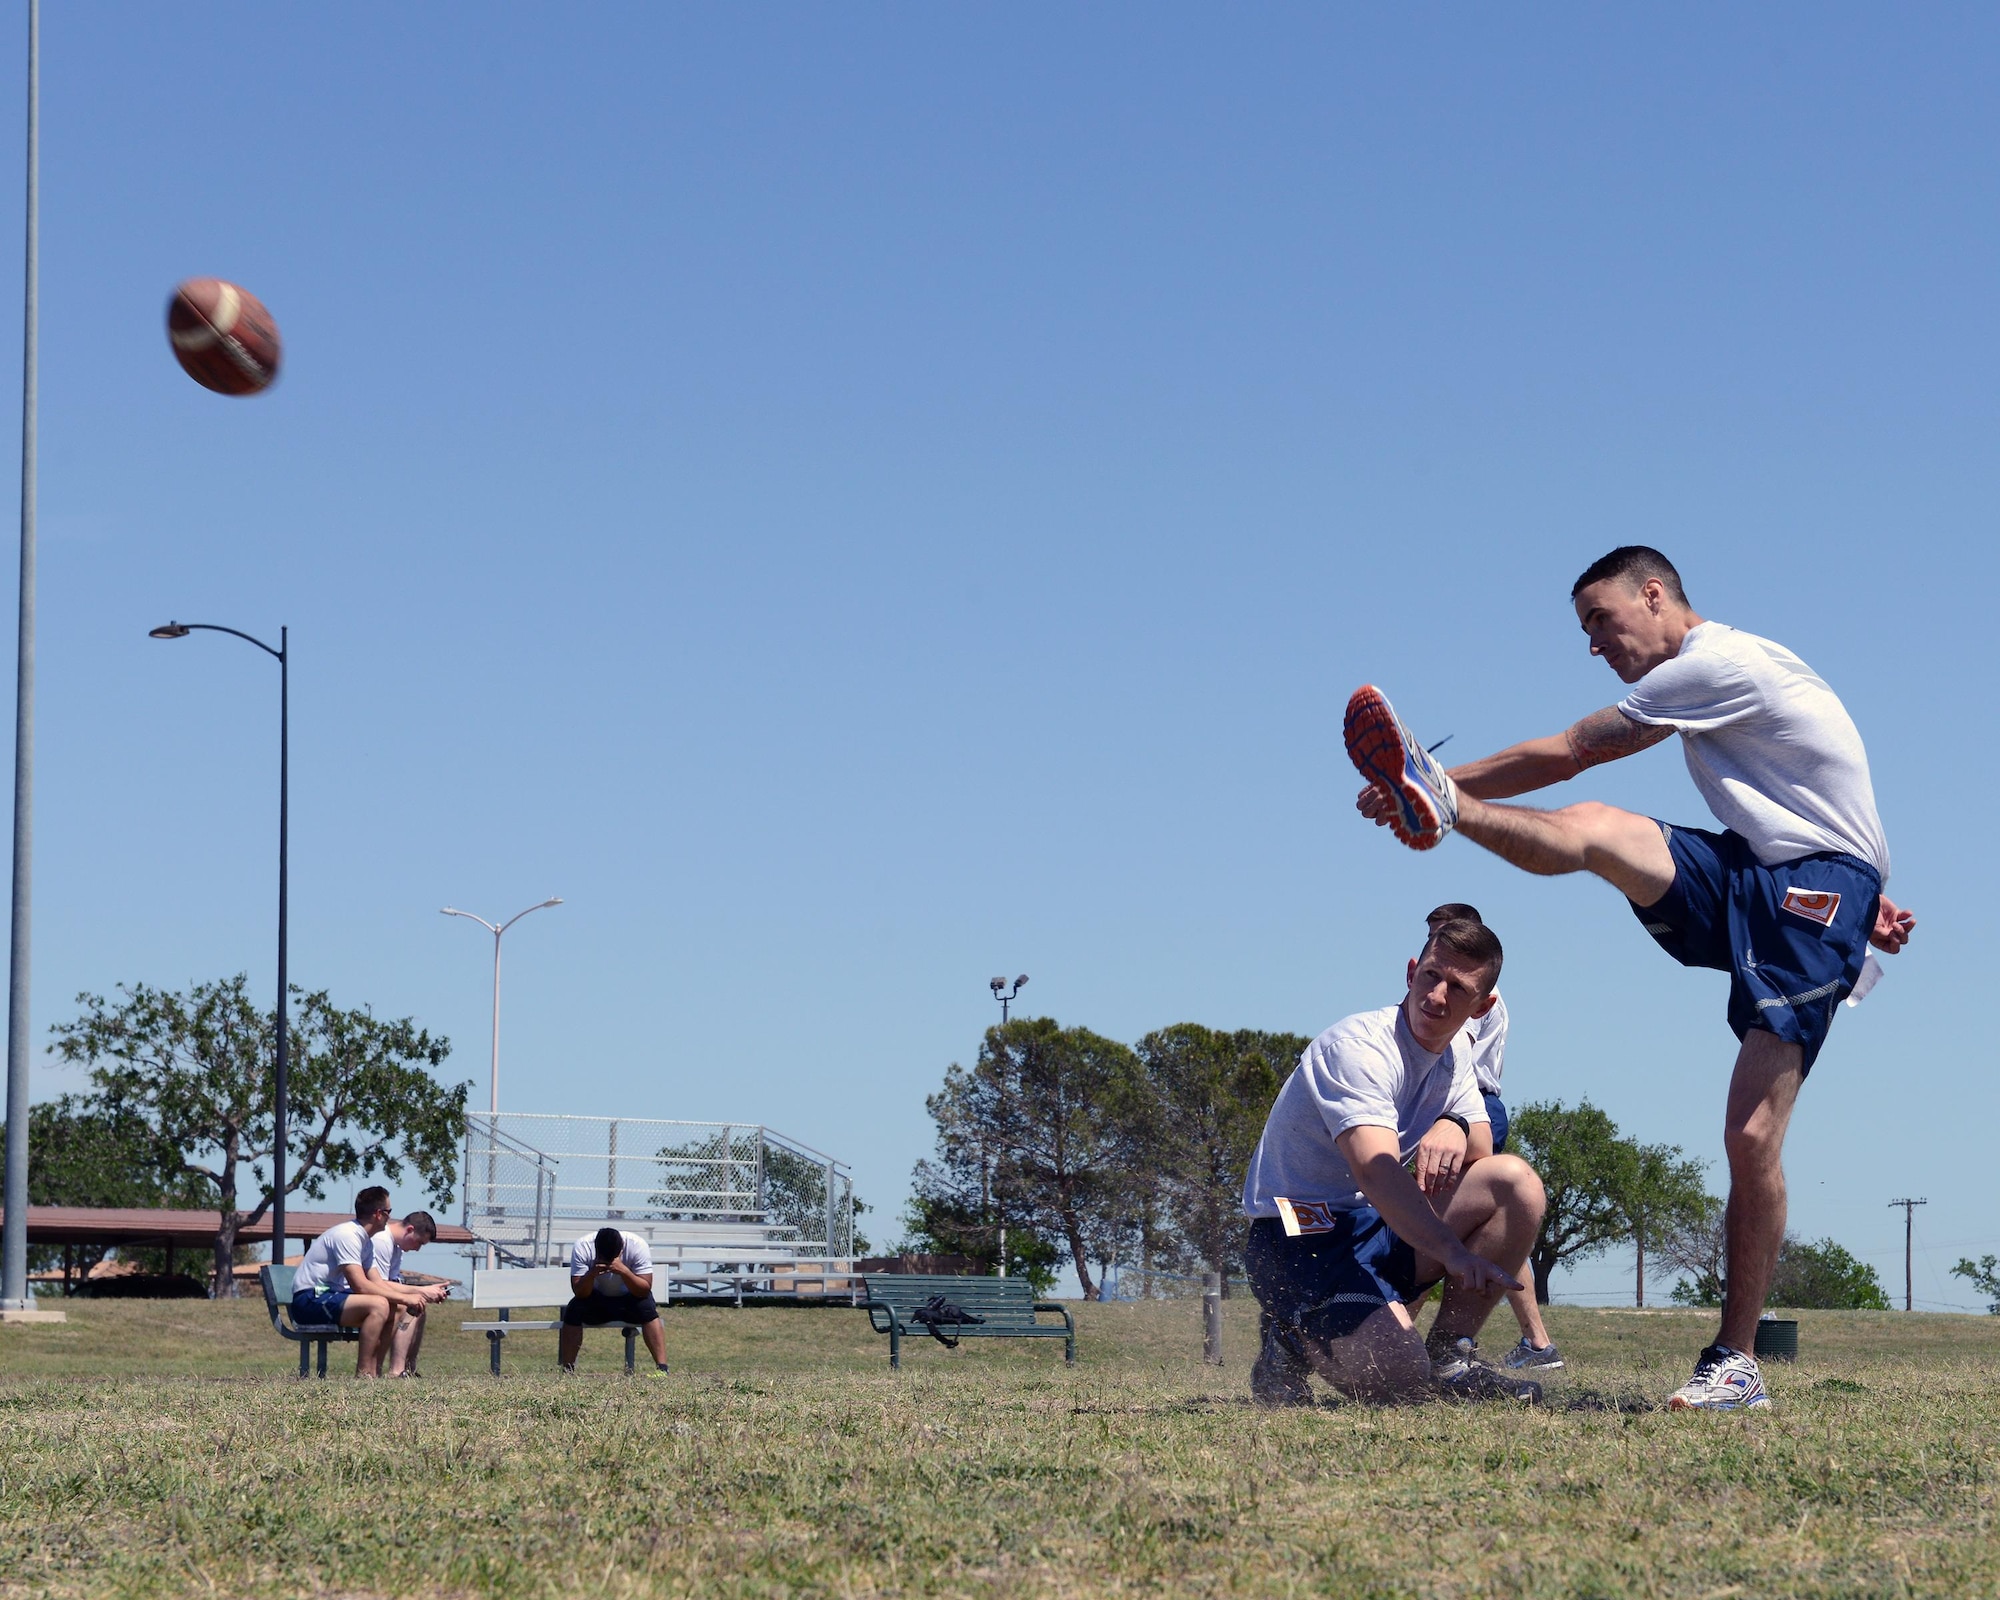 2nd Lt. John Silvi, 47th Student Squadron awaiting pilot training, right, kicks a football on the field at Laughlin Air Force Base, Texas, April 5, 2016. The Warrior Games was an opportunity to change up physical training by challenging students through competitive events. (U.S. Air Force photo by Senior Airman Jimmie D. Pike)